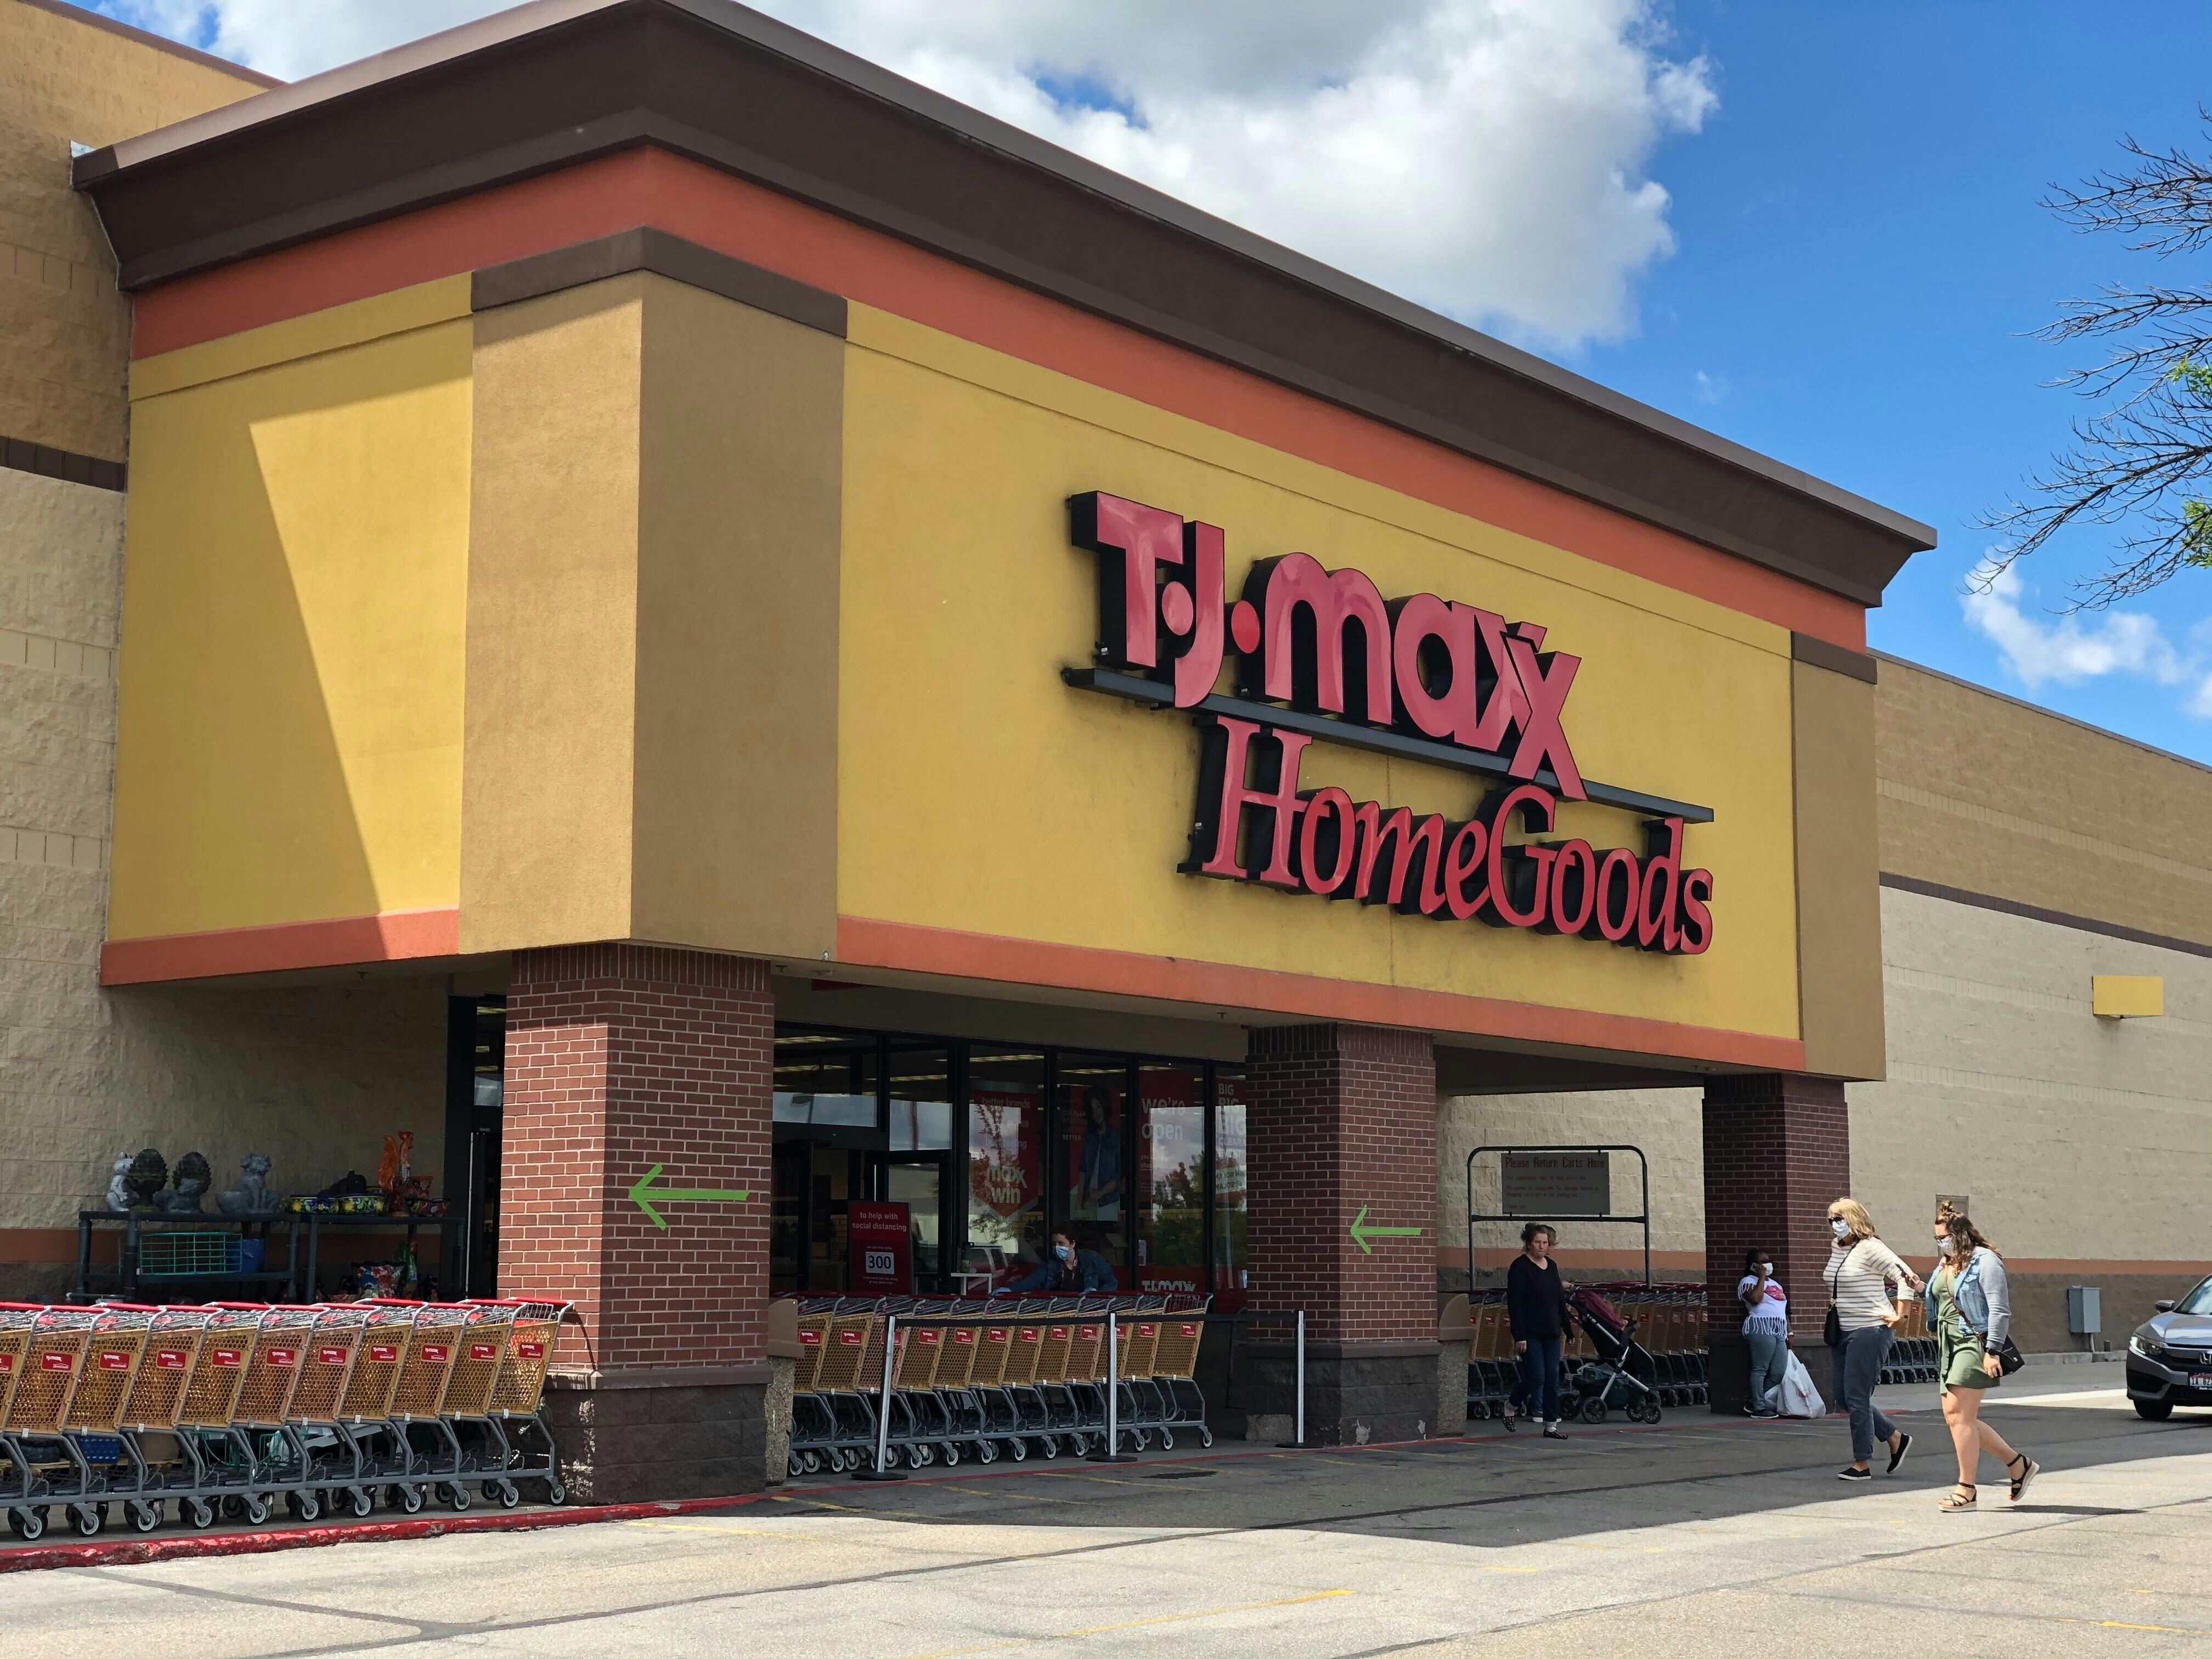 24 Ways to Save When You Shop T.J.Maxx - The Krazy Coupon Lady